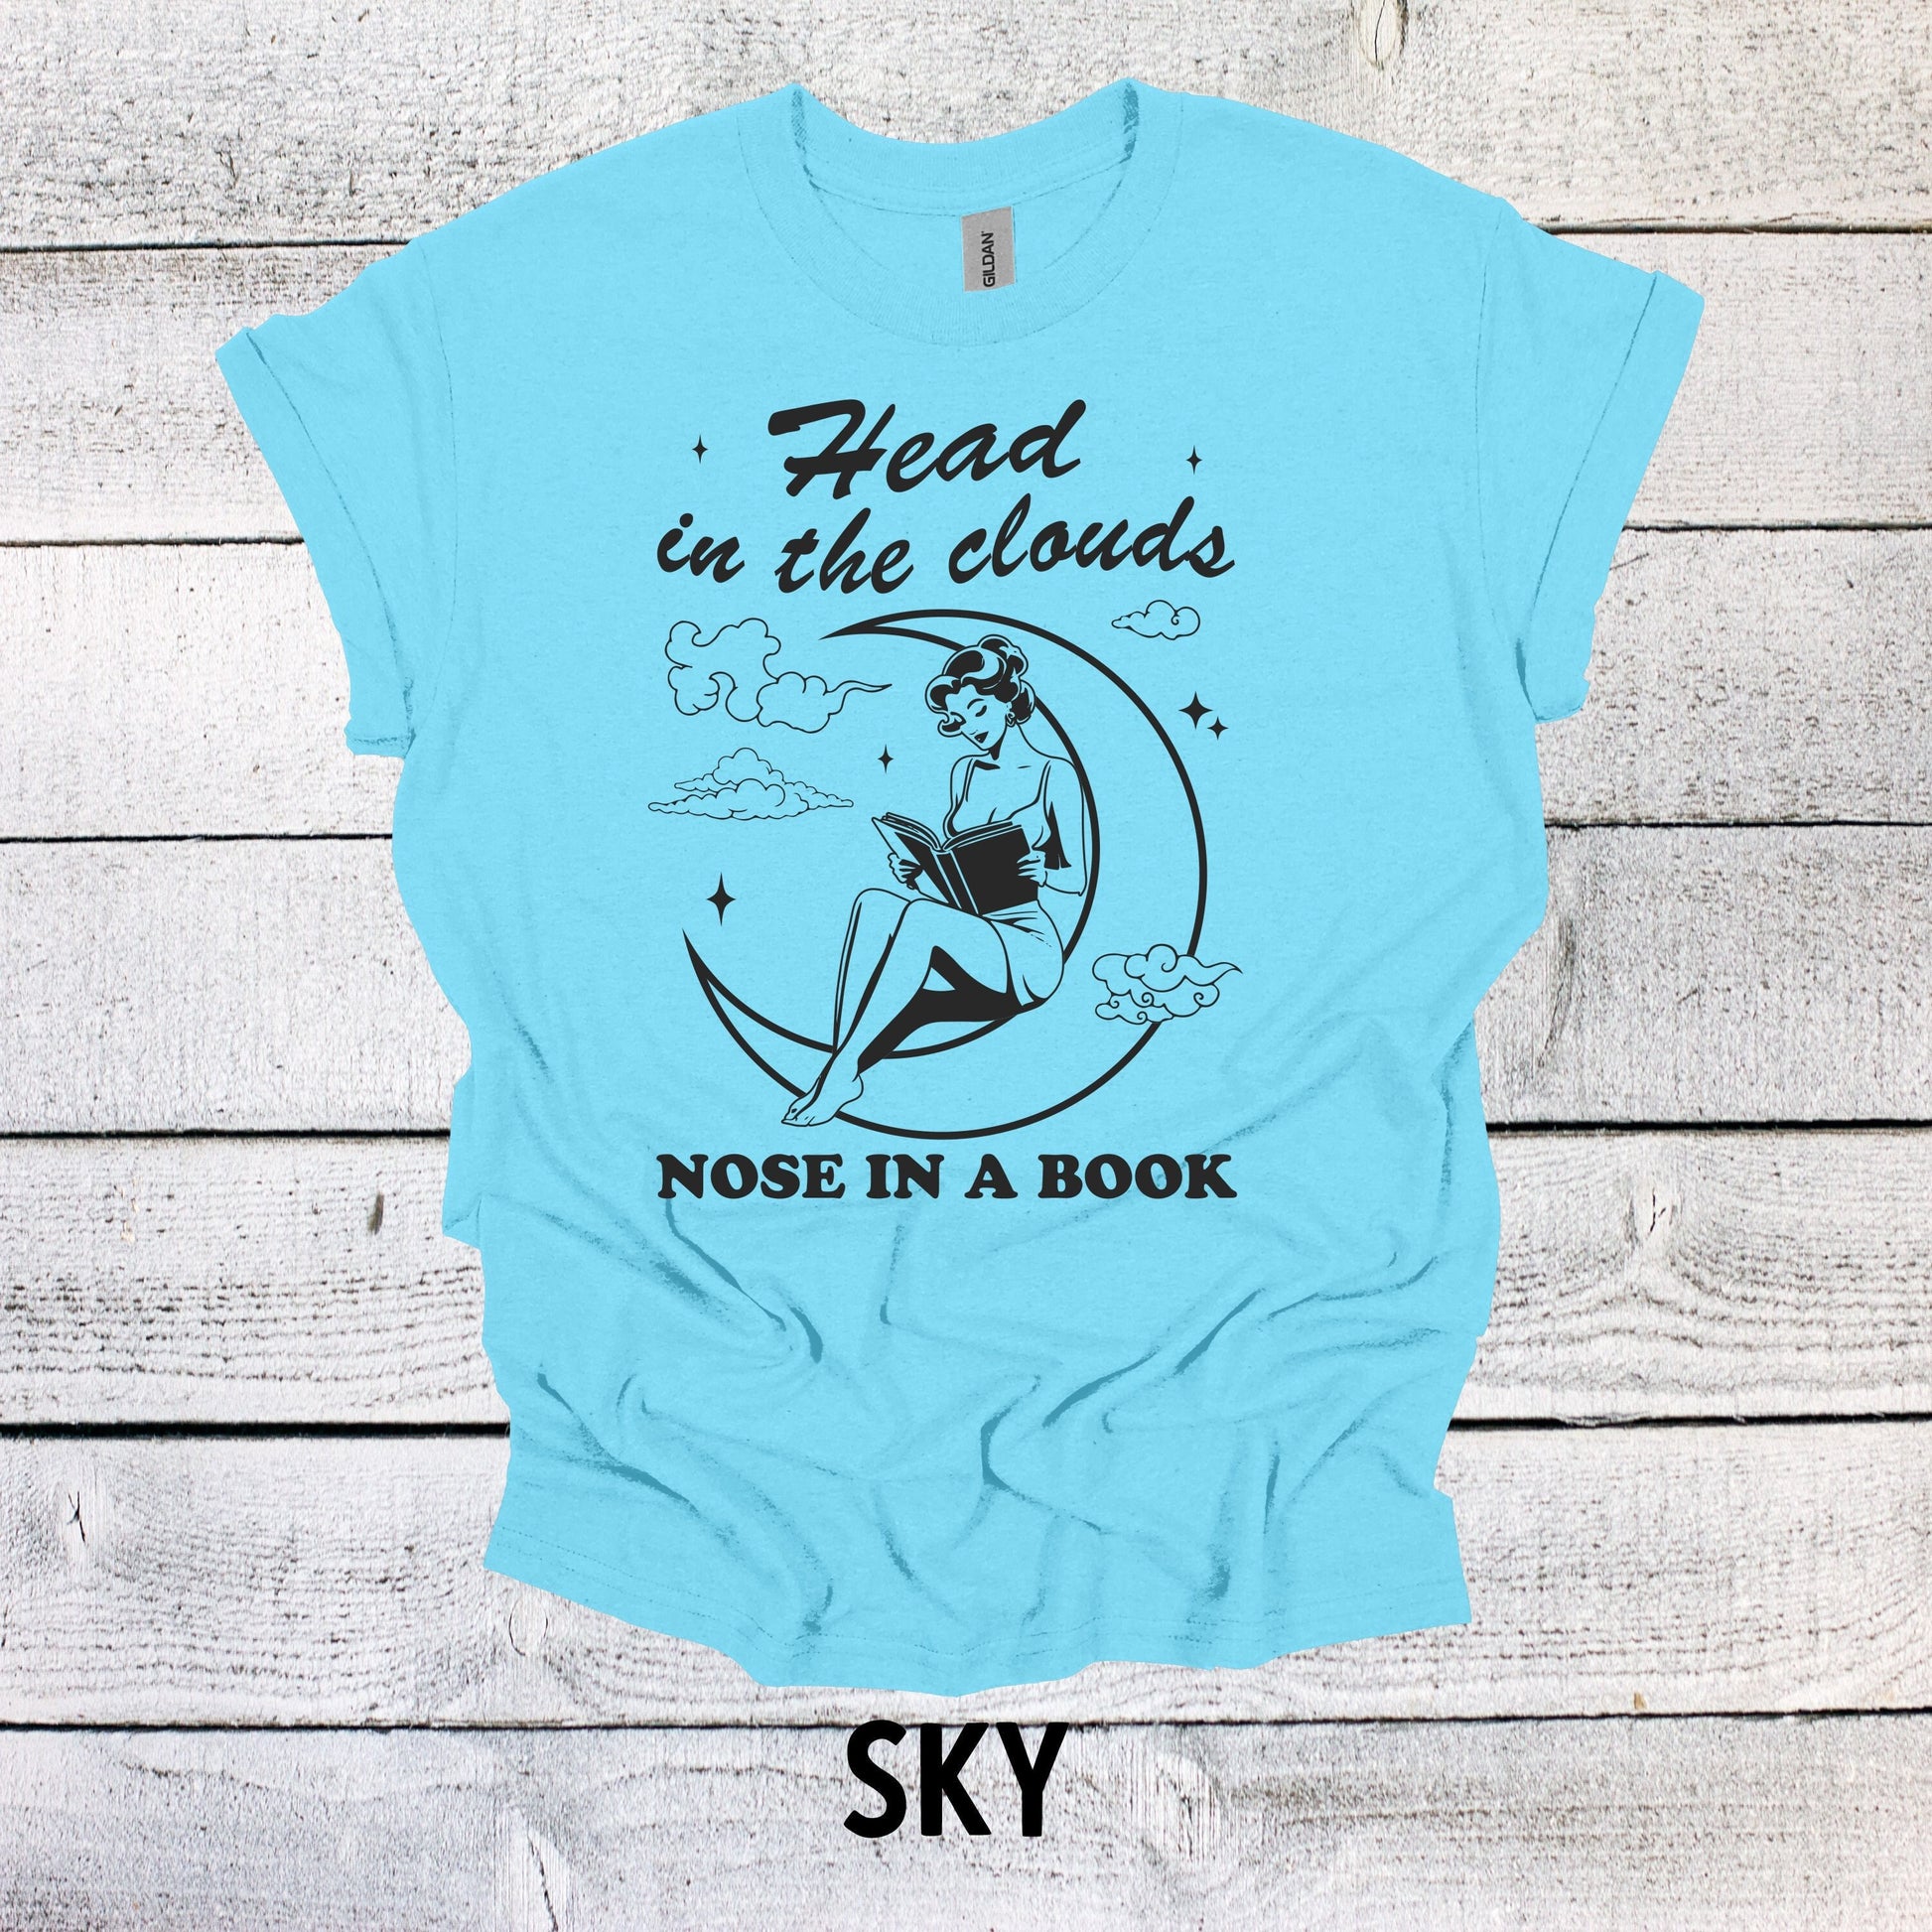 Funny Bookworm Shirt - Head in the Clouds, Nose in a Book